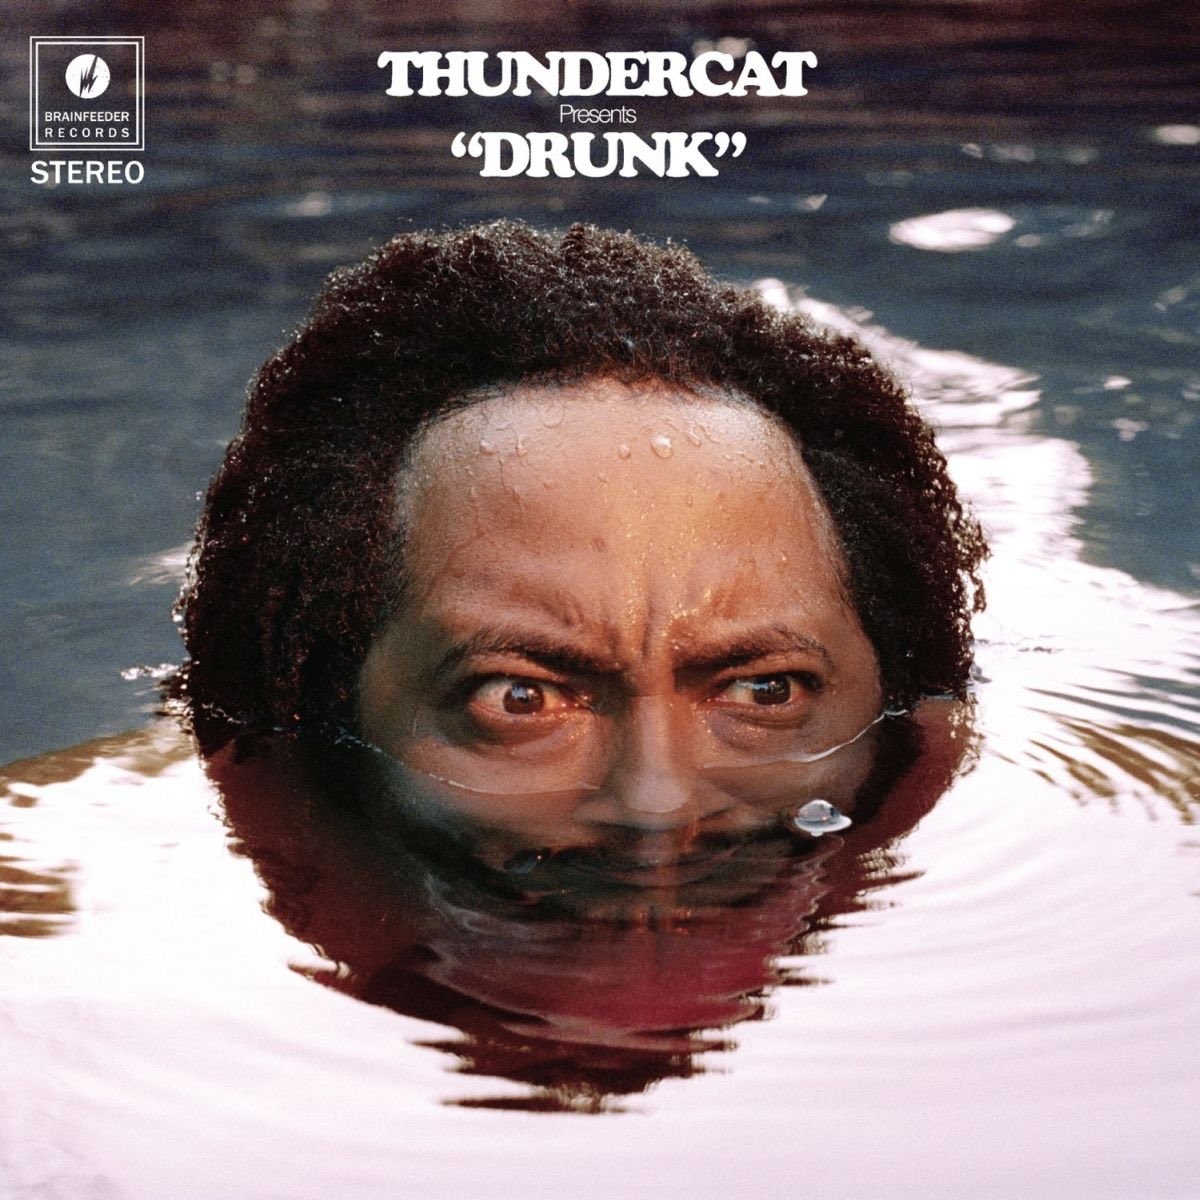 4. Thundercat - DrunkA very personal favorite, Drunk is an aesthetic driven trip through the head of Thundercat with a wide variety of songs that make for a very cohesive and enjoyable listen from front to back.